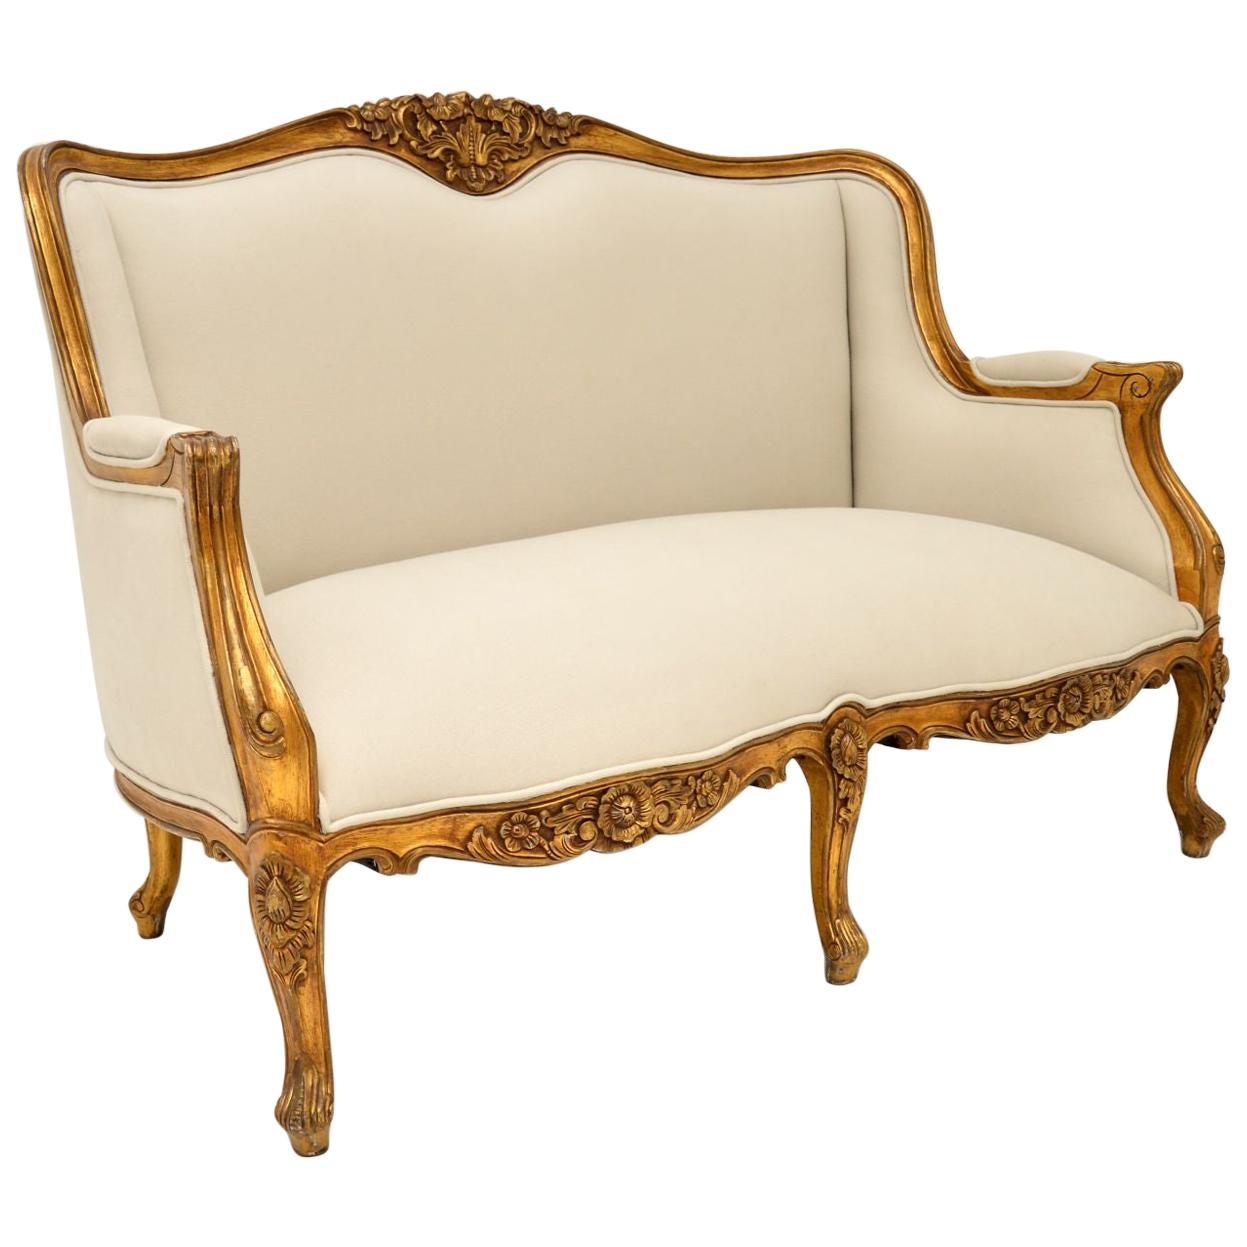 Antique Louis Style French Gilt Wood Sofa